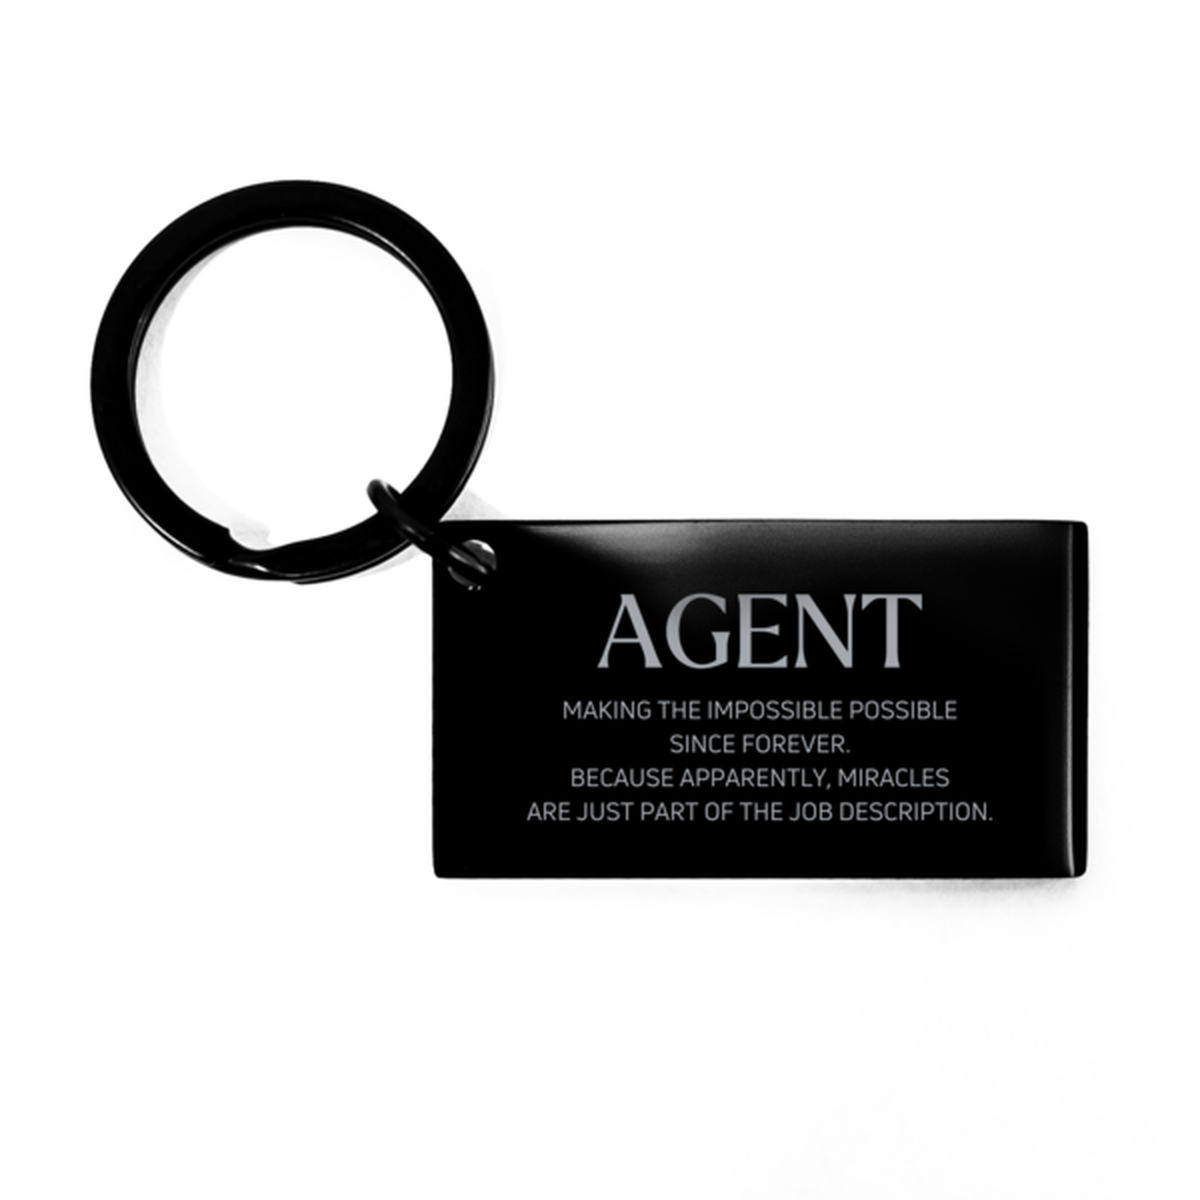 Funny Agent Gifts, Miracles are just part of the job description, Inspirational Birthday Keychain For Agent, Men, Women, Coworkers, Friends, Boss